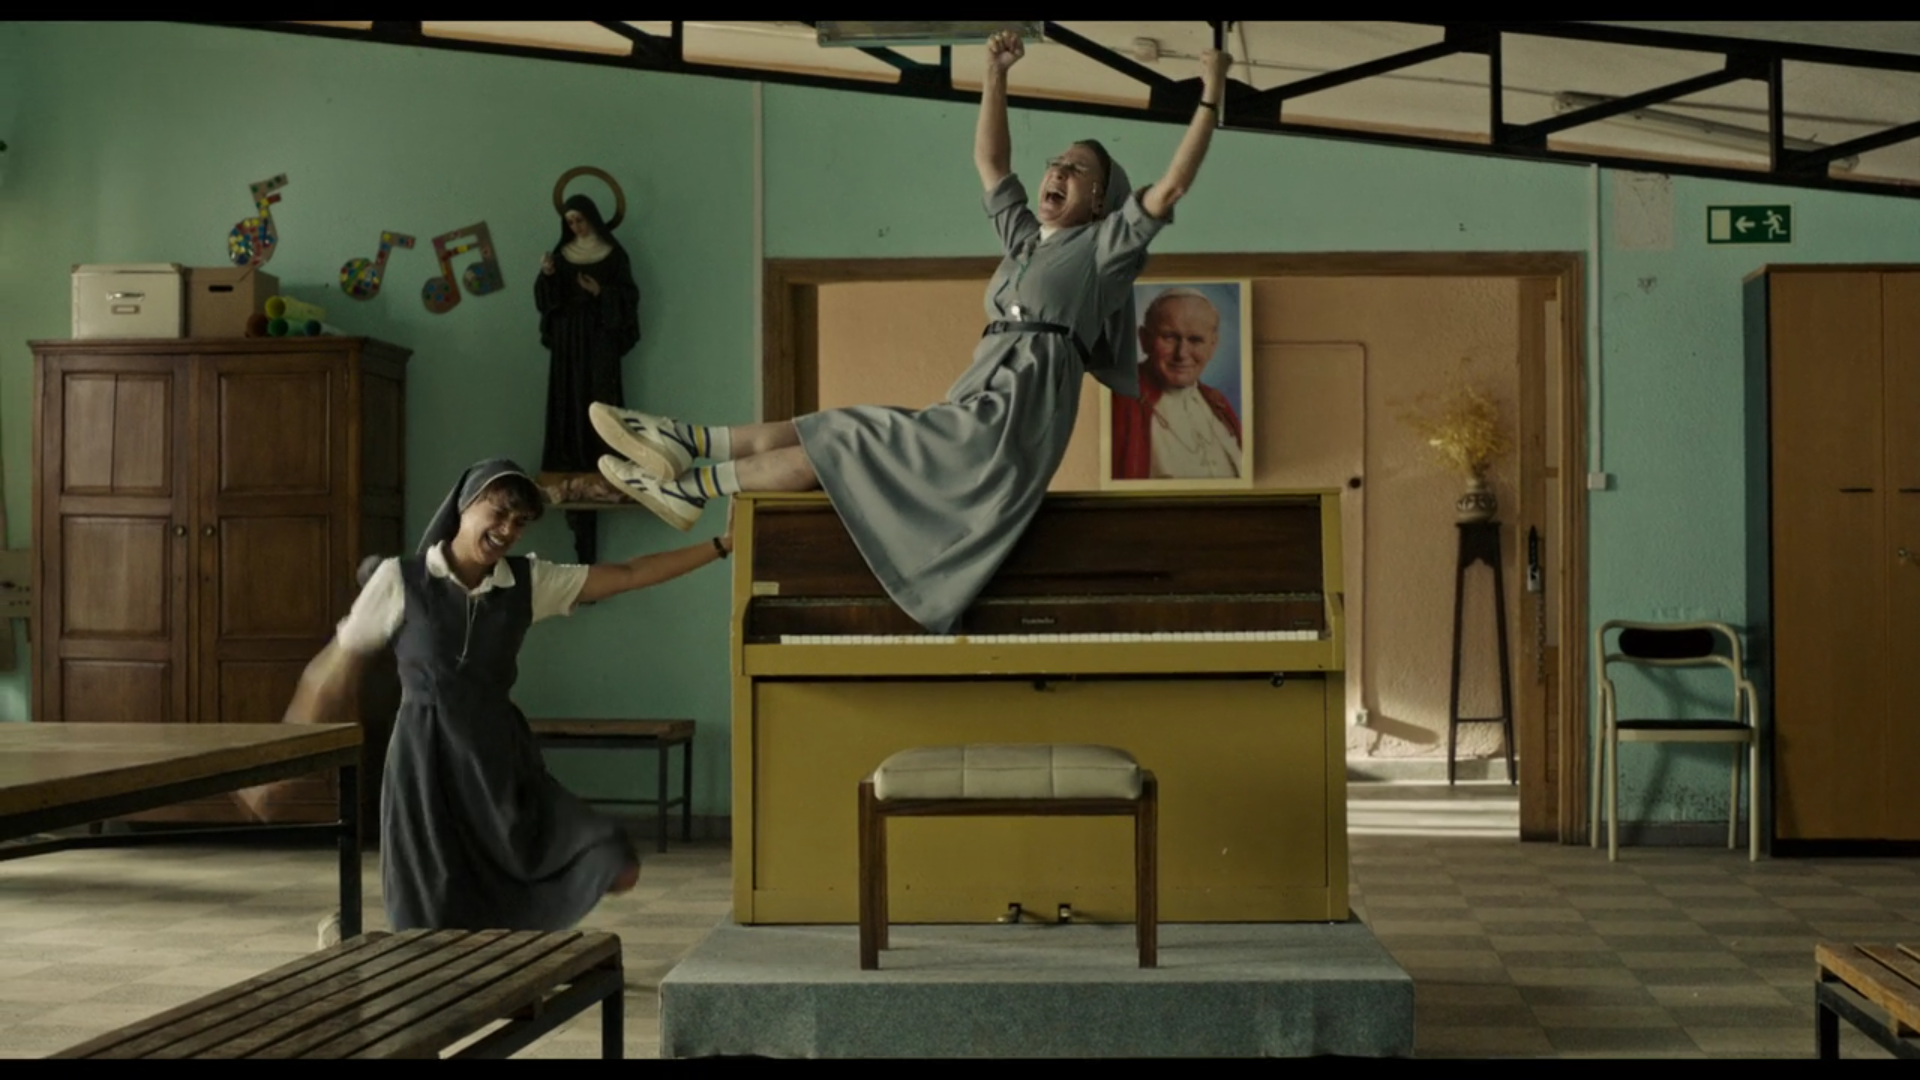 A nun sits on top of a piano, raising her hands skyward while a novice stands next to her, dancing.